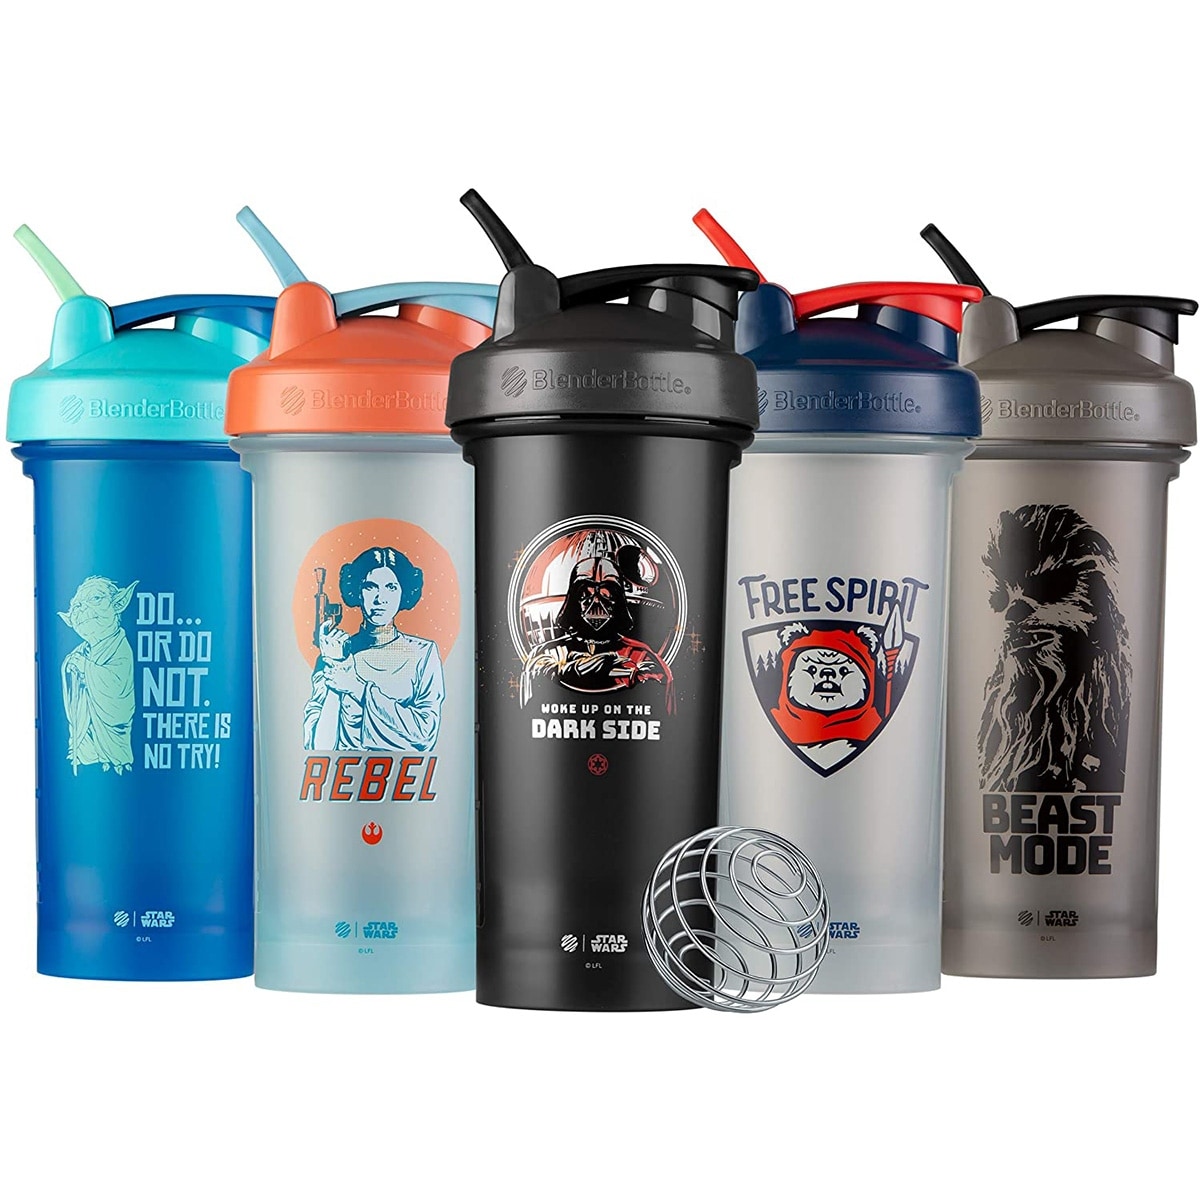 https://ak1.ostkcdn.com/images/products/is/images/direct/93740a1b304187ea49bdb75c9030fe96777fb92a/Blender-Bottle-Star-Wars-Classic-28-oz.-Shaker-Mixer-Cup-with-Loop-Top.jpg